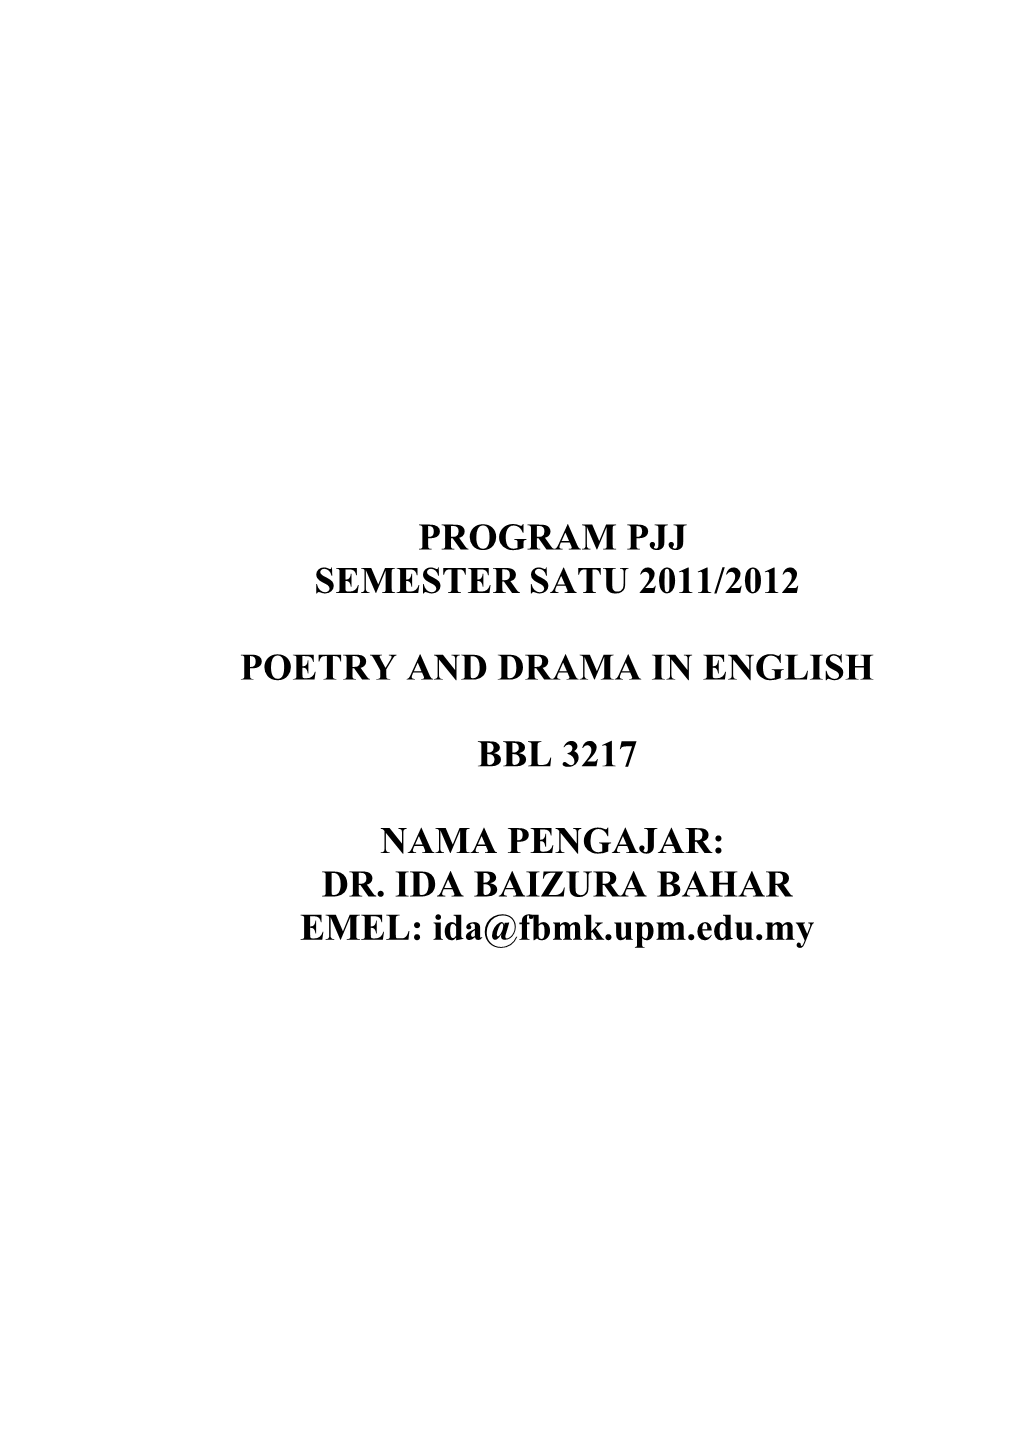 Poetry and Drama in English (Bbl 3217)